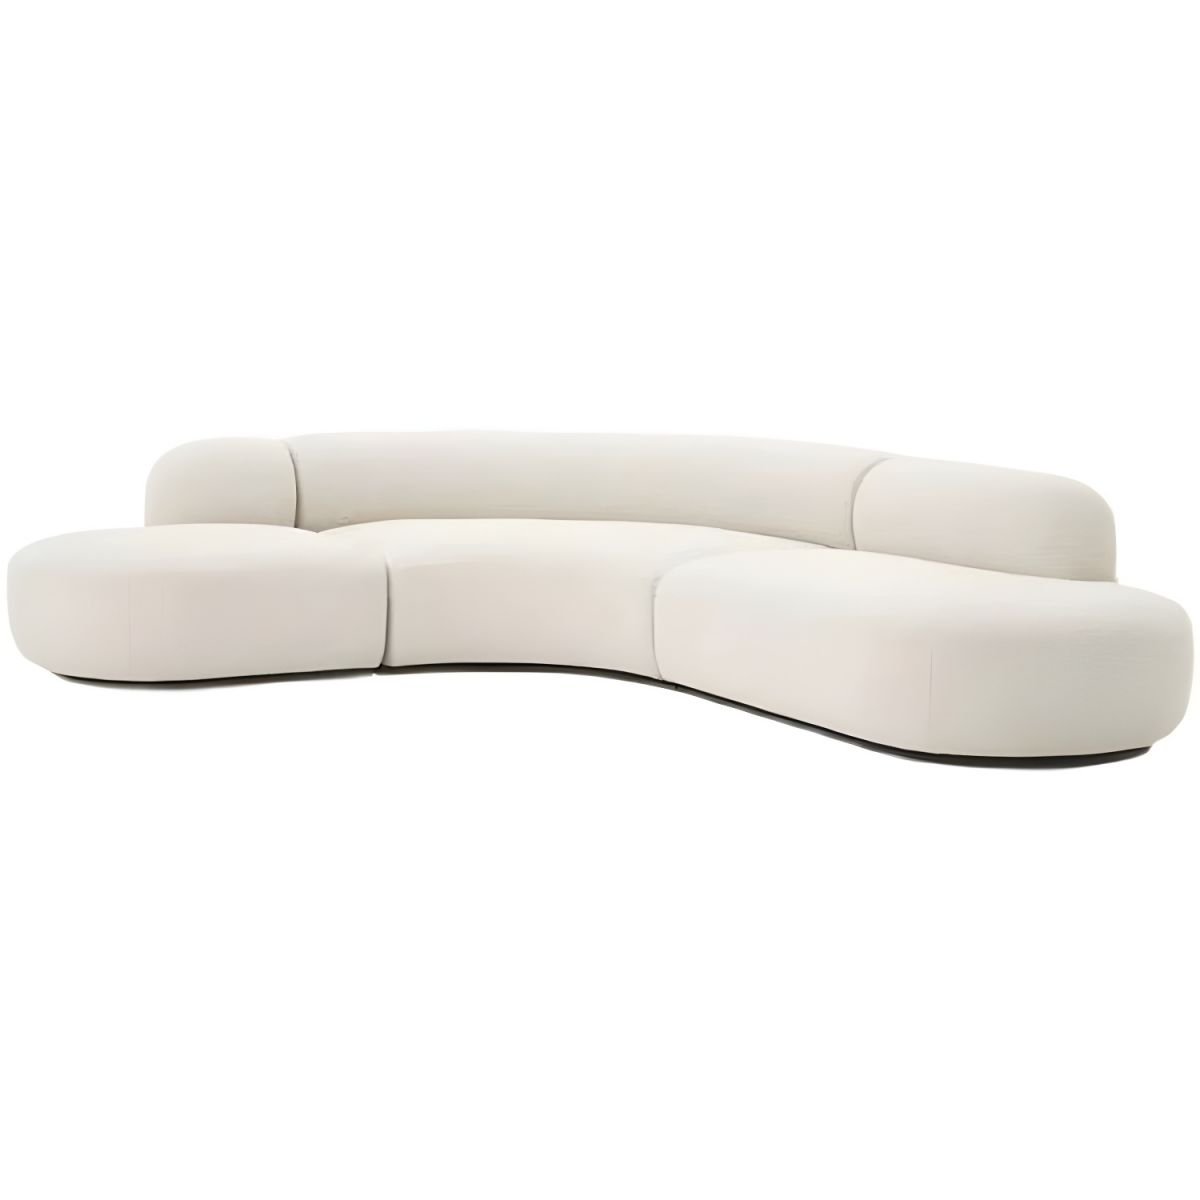 Contemporary Modular Sectional Sofa in White of 110" W with Tight Back - 110"L x 71"W x 31.5"H Sherpa